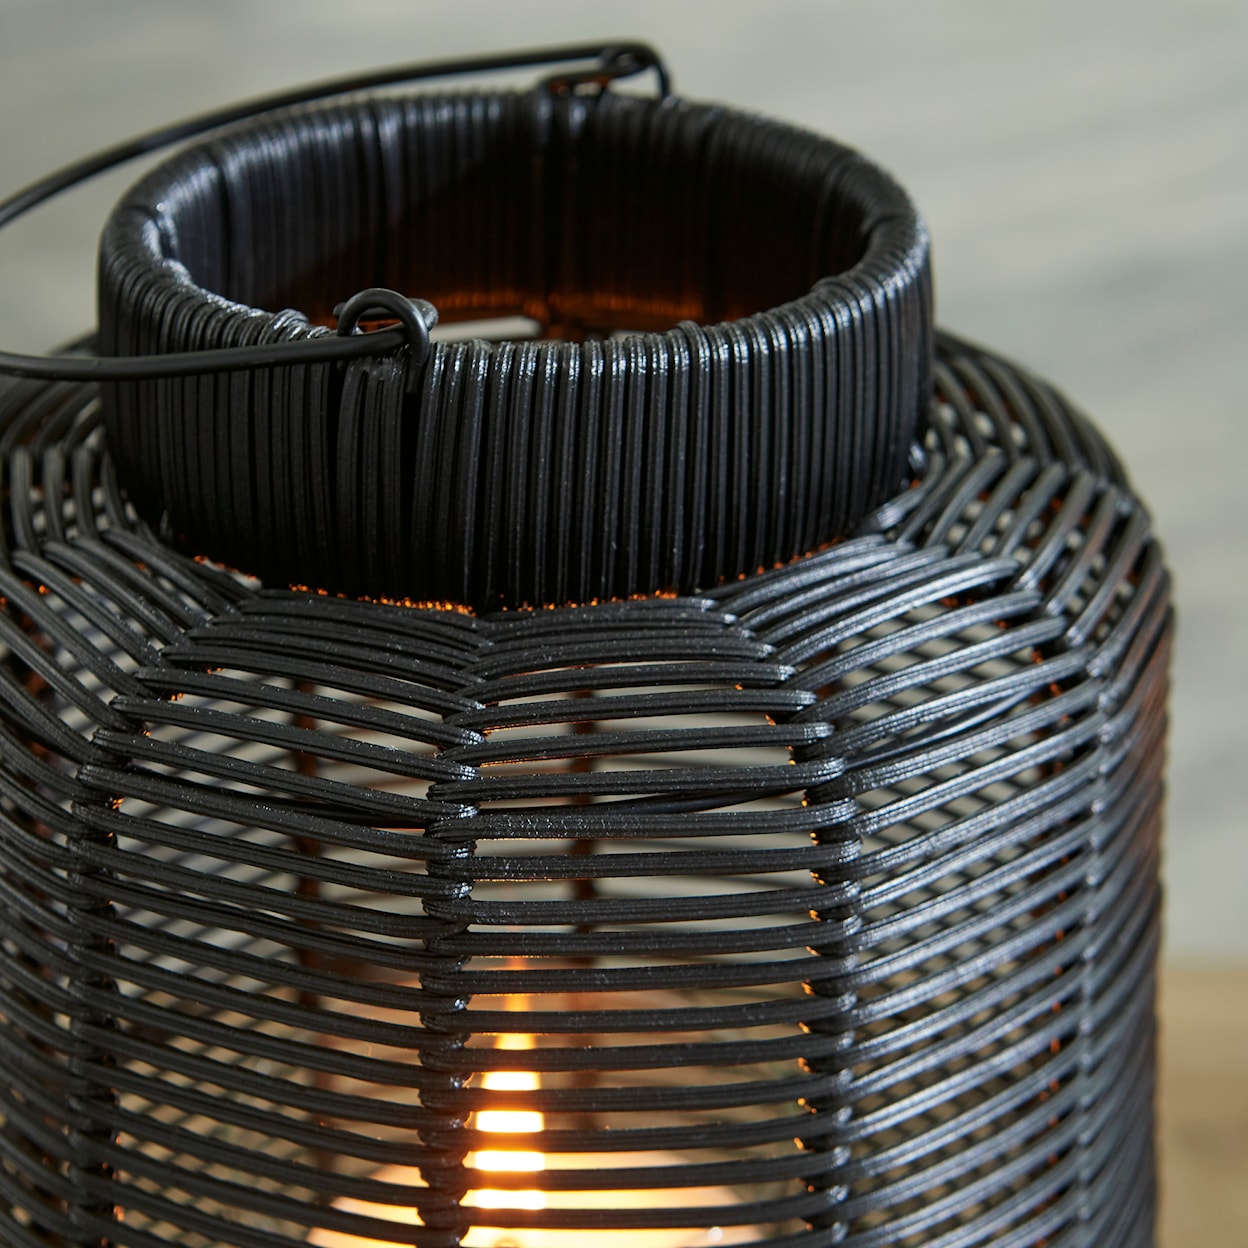 Signature Design by Ashley Accents Indoor/Outdoor Evonne Lantern